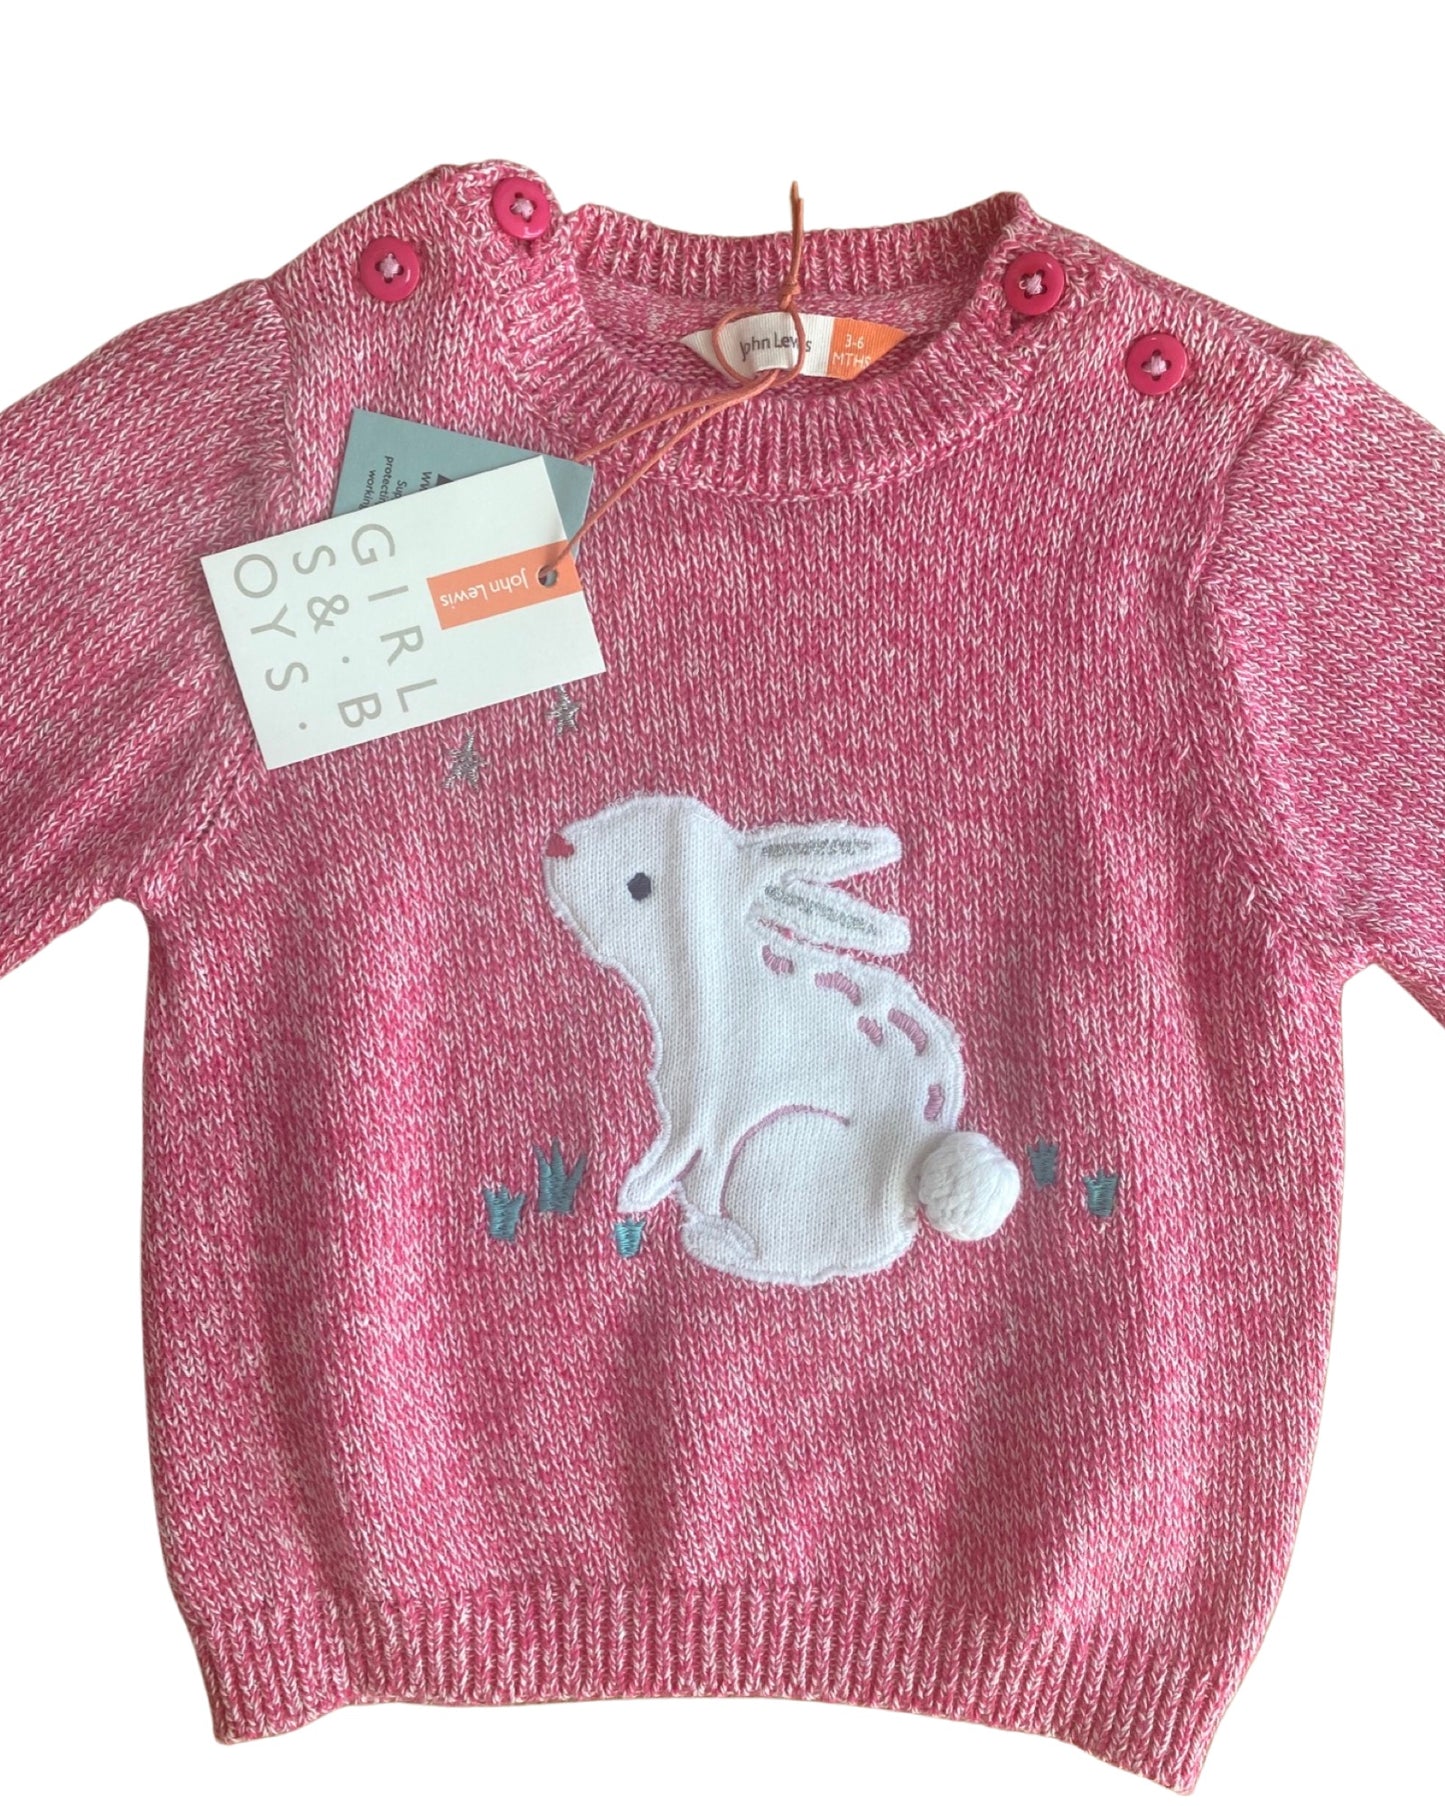 John Lewis knit jumper with embroidered bunny (3-6mths)